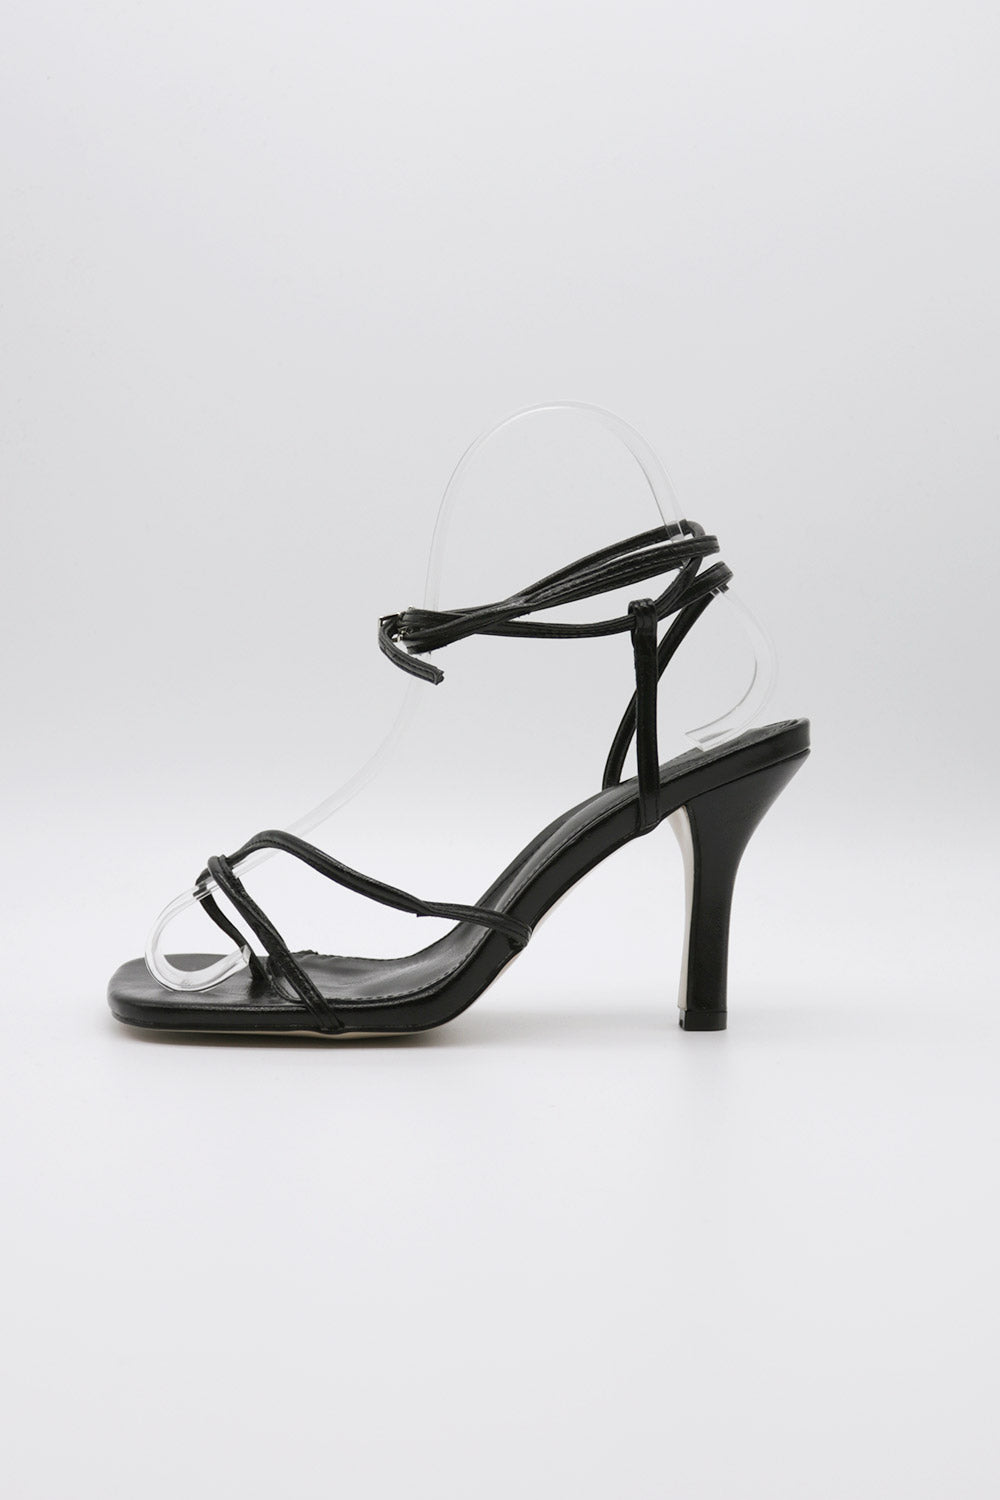 storets.com Strappy Heeled Sandals